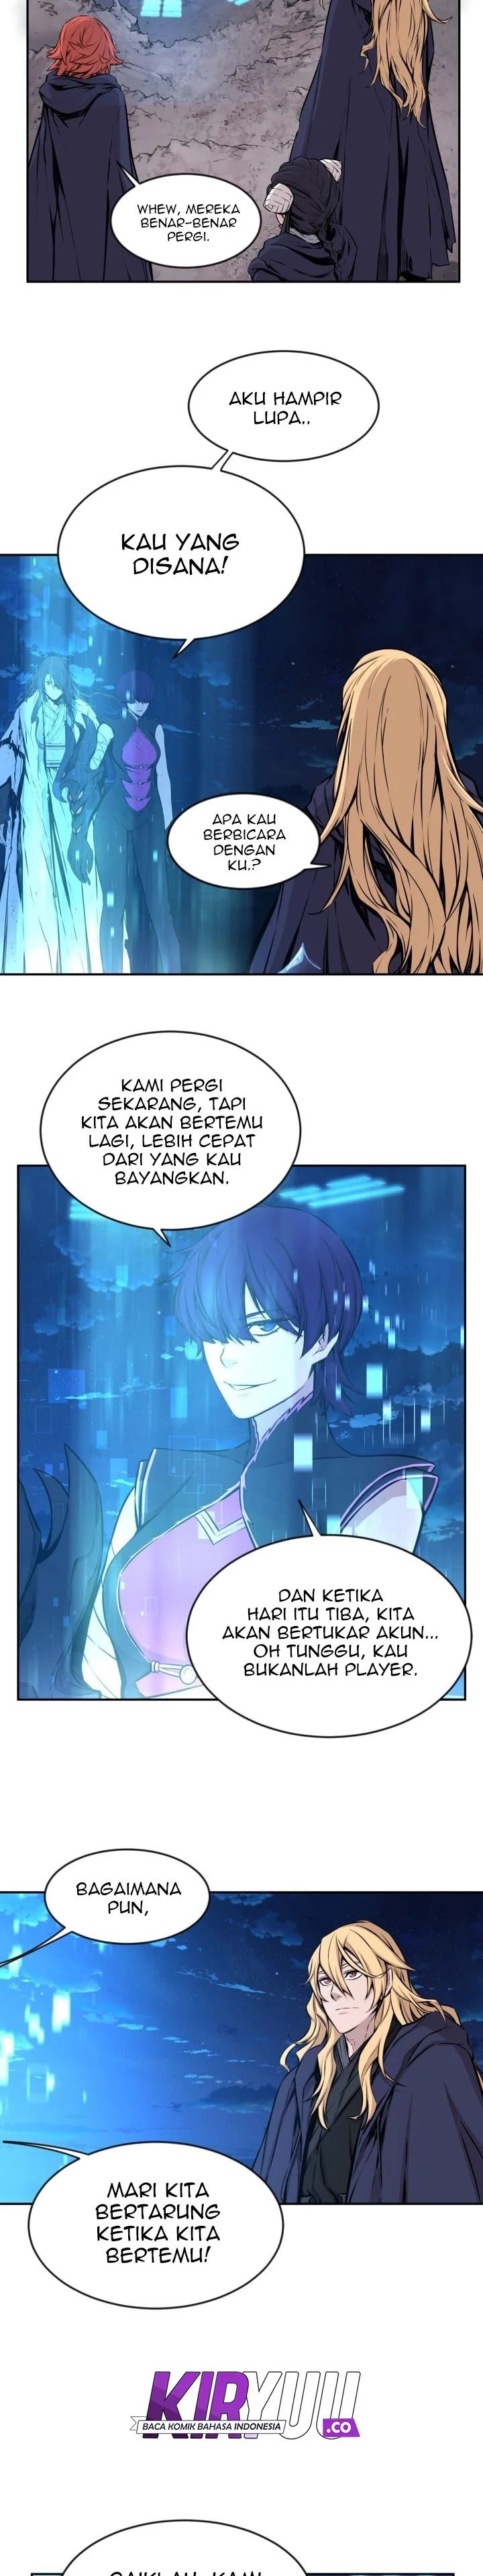 Legend Of Mir Gold Armored Sword Dragon Chapter 20